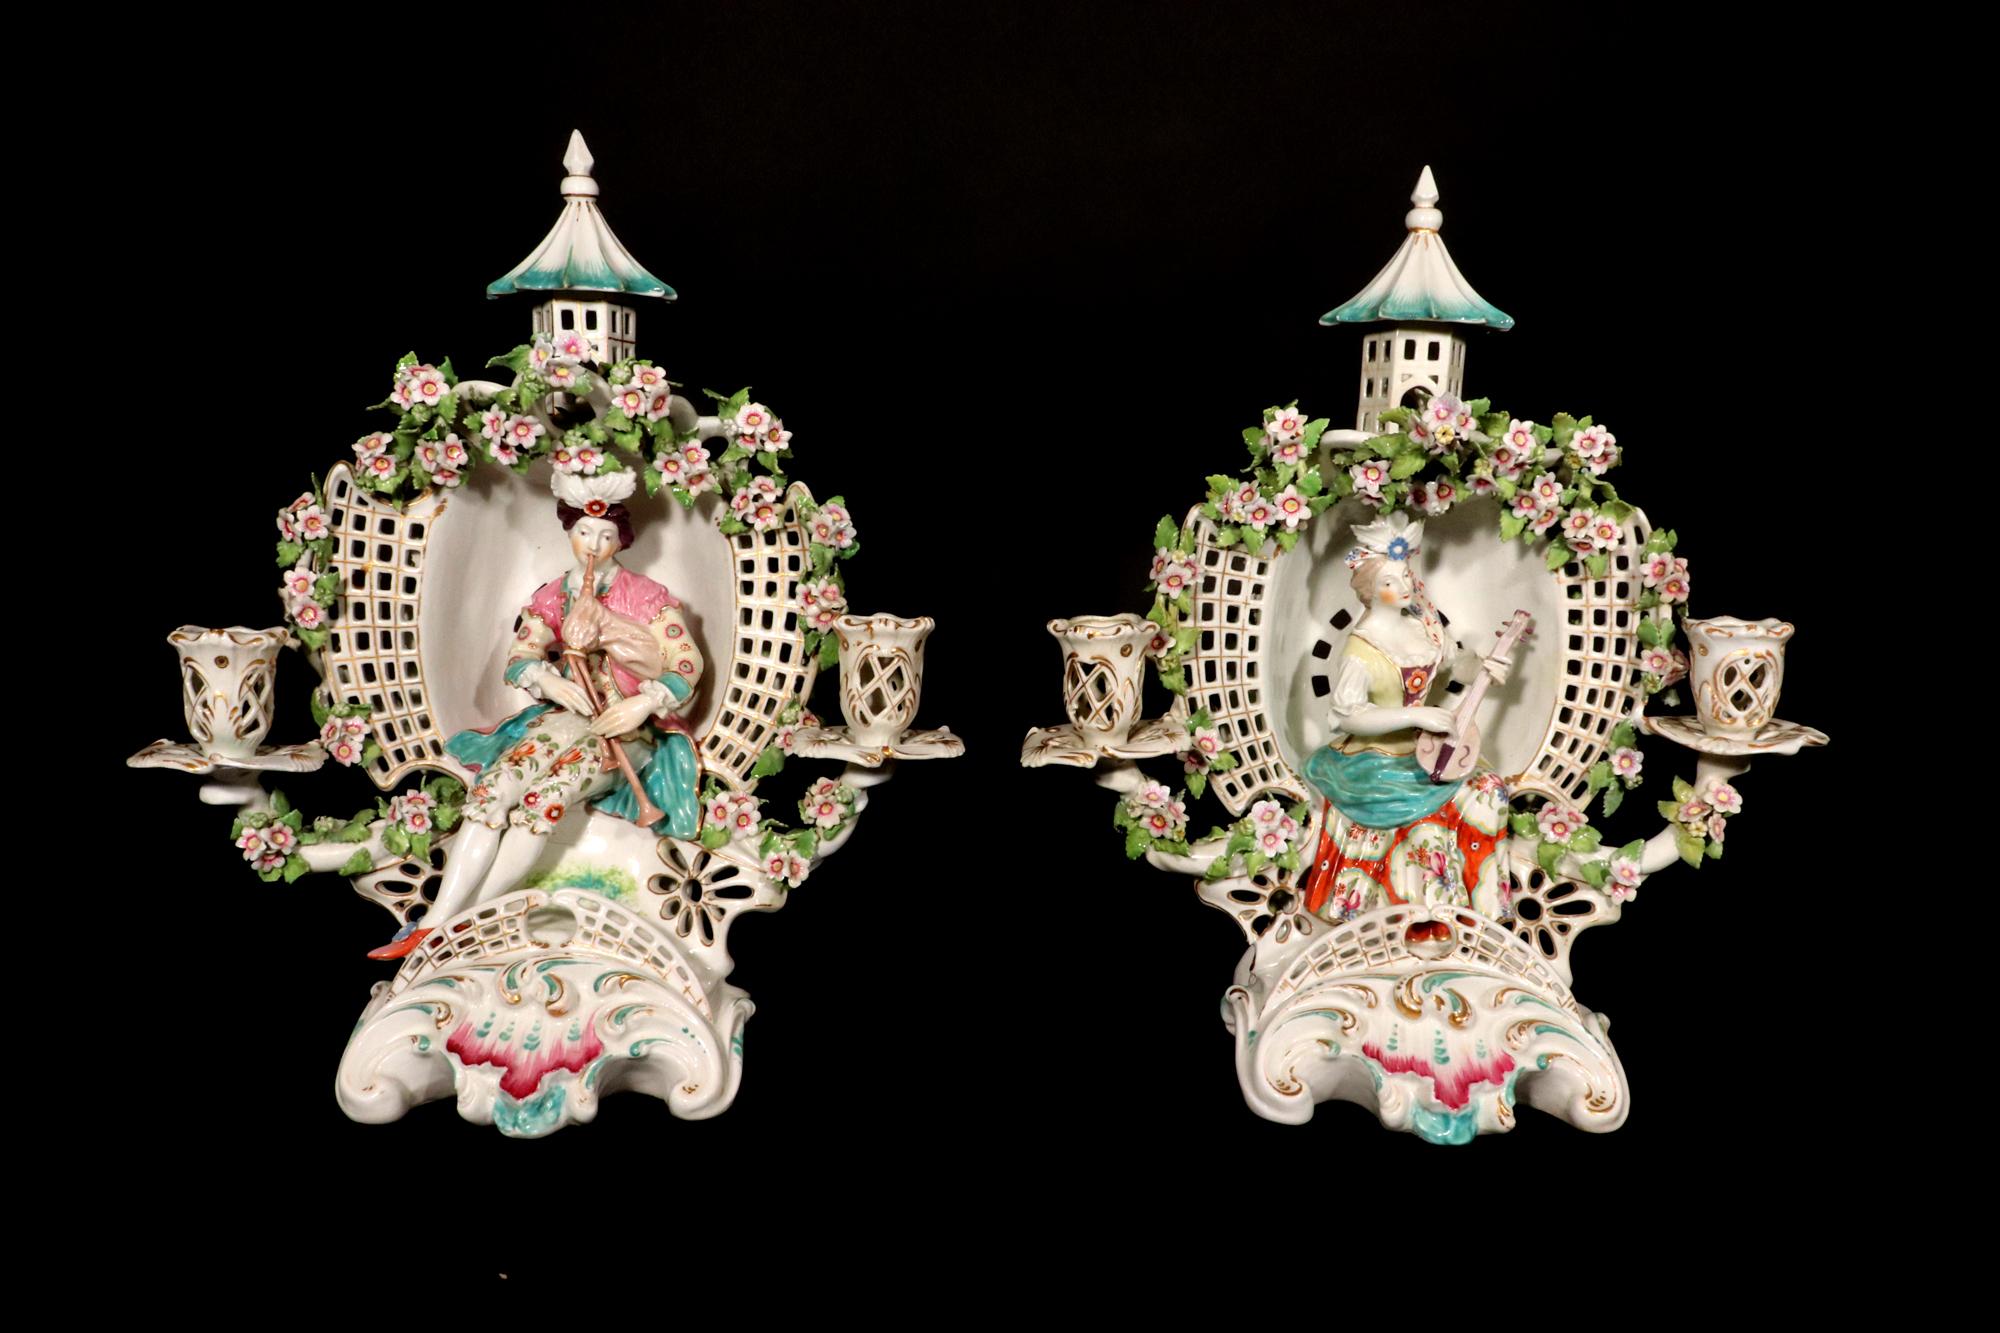 English Porcelain Arbor Musician Candelabrum,
Derby Porcelain,
William Duesbury, 
Circa 1765-70

The Derby porcelain arbor musician candelabrum are a pair. One is a male musician playing the bagpipes, and, on the other a lady playing the lute. Each